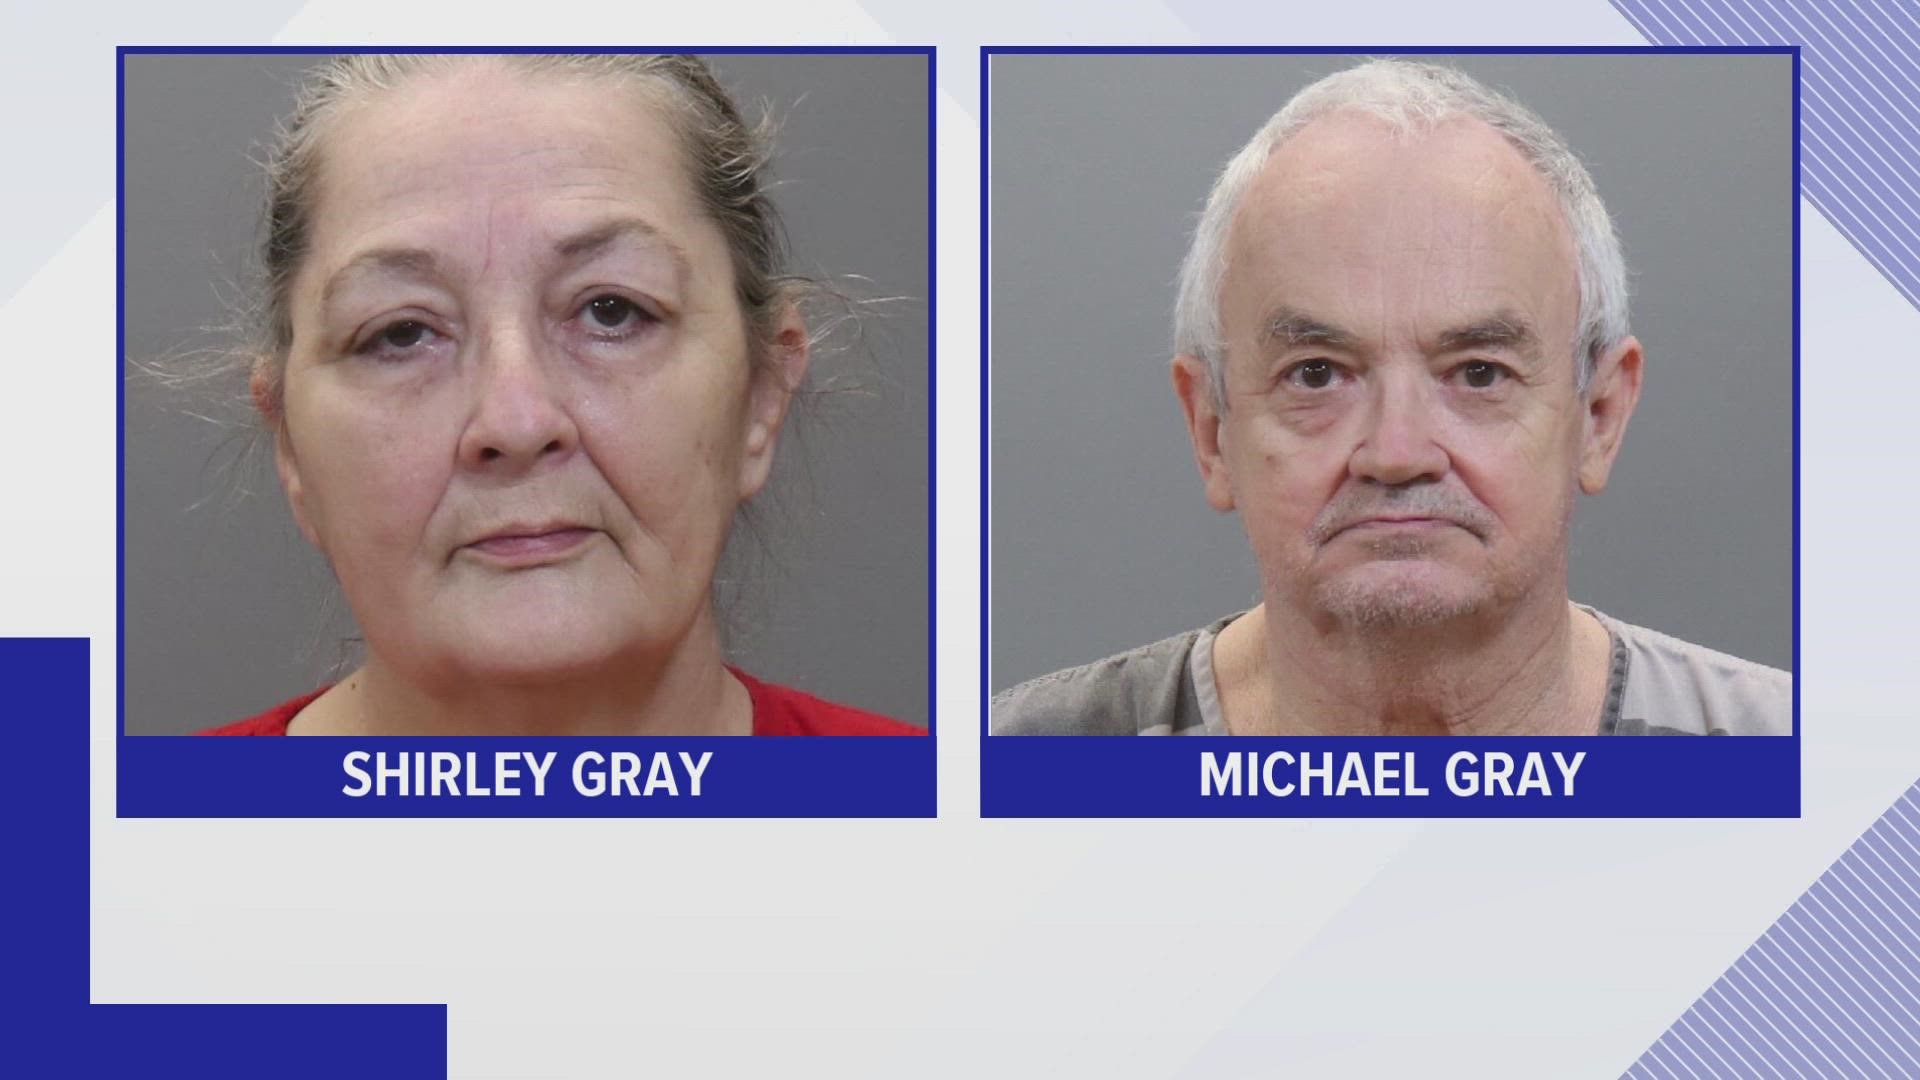 Michael and Shirley Gray face charges of child abuse, first-degree murder and more from the 2020 case of abusing several adopted children and killing two of them.